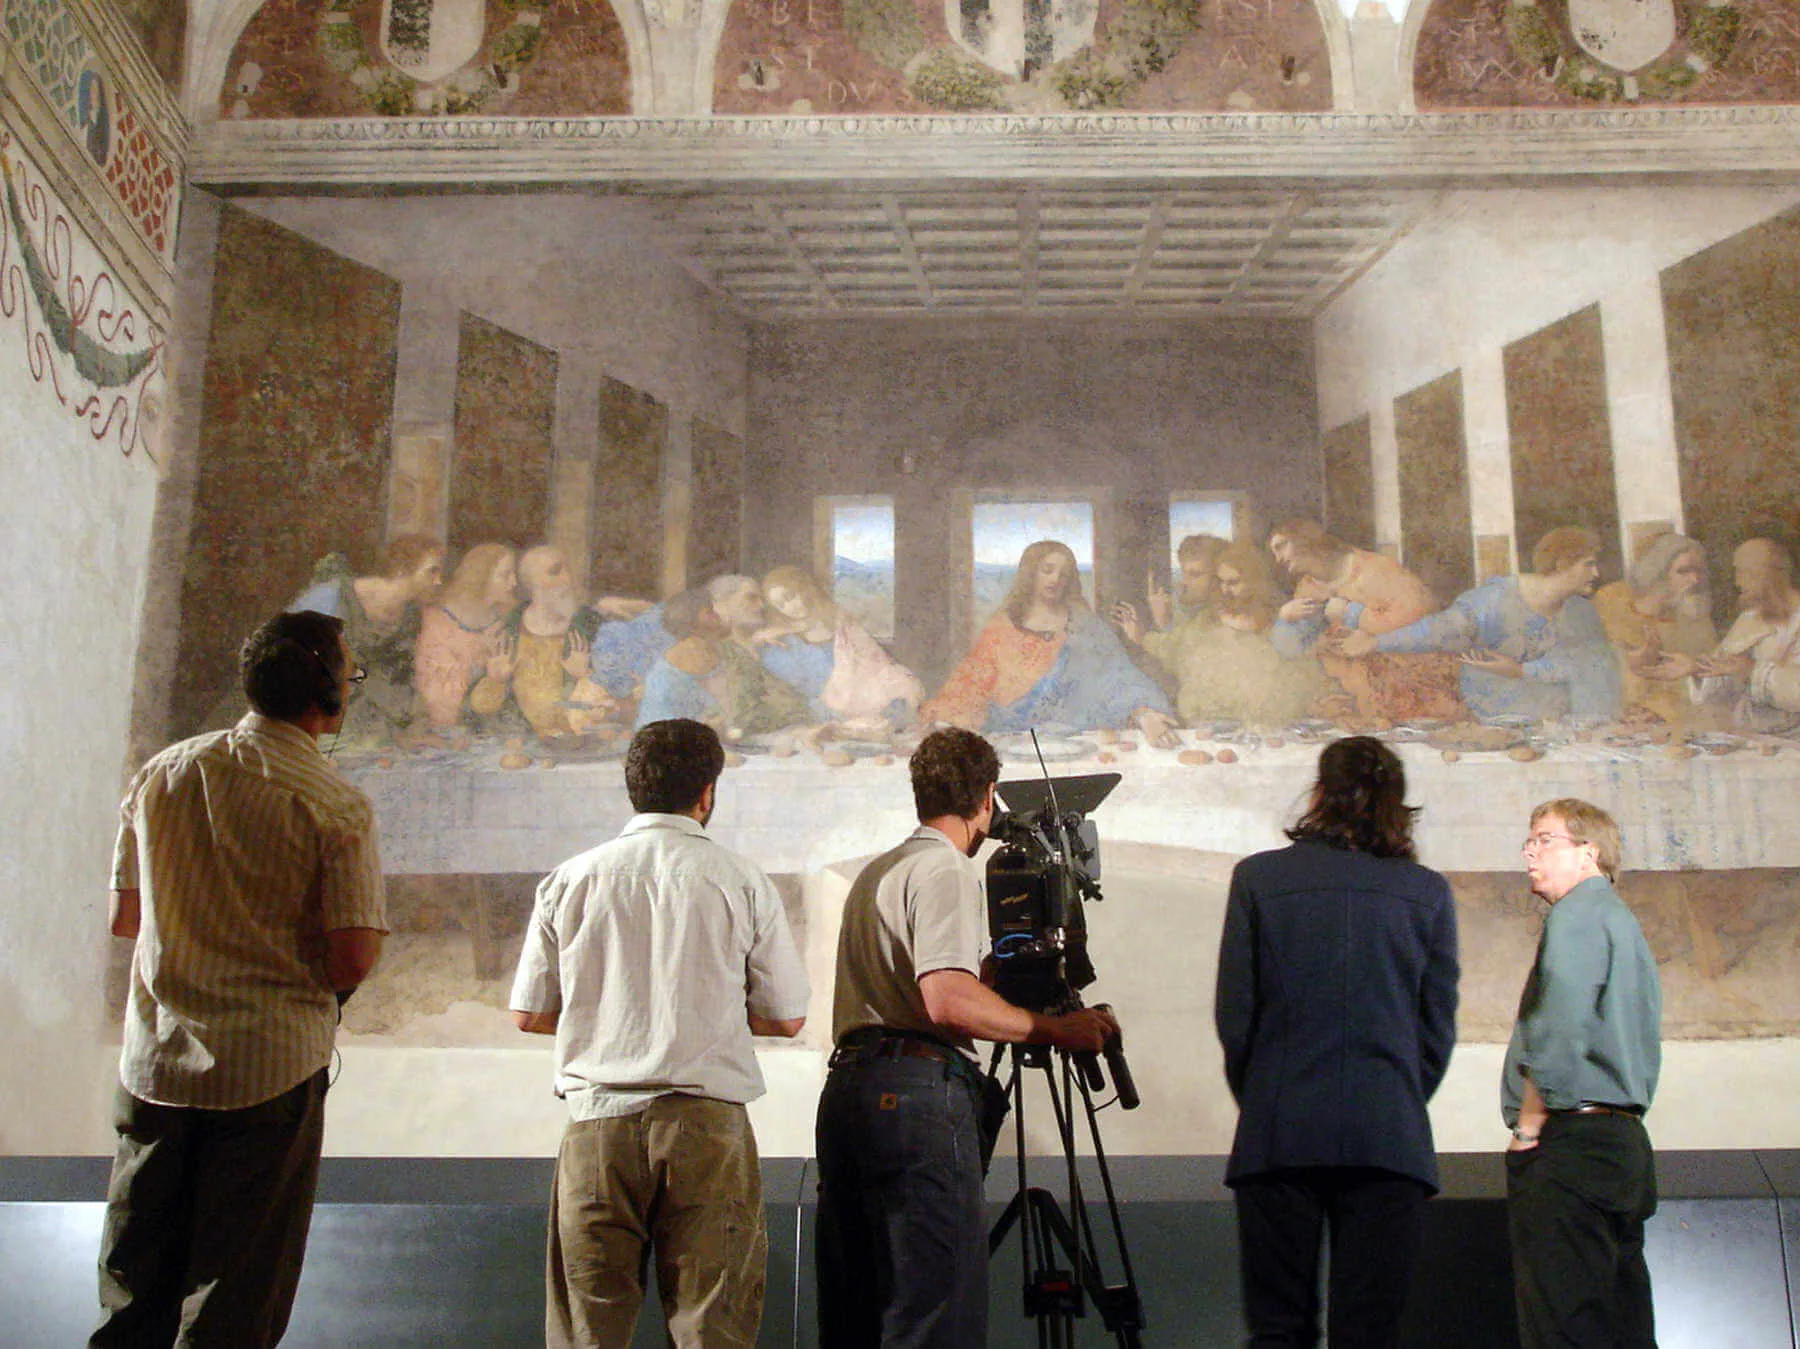 The TV crew for Rick Steves often has access to iconic sights, such as this church in Milan with The Last Supper by Leonardo da Vinci